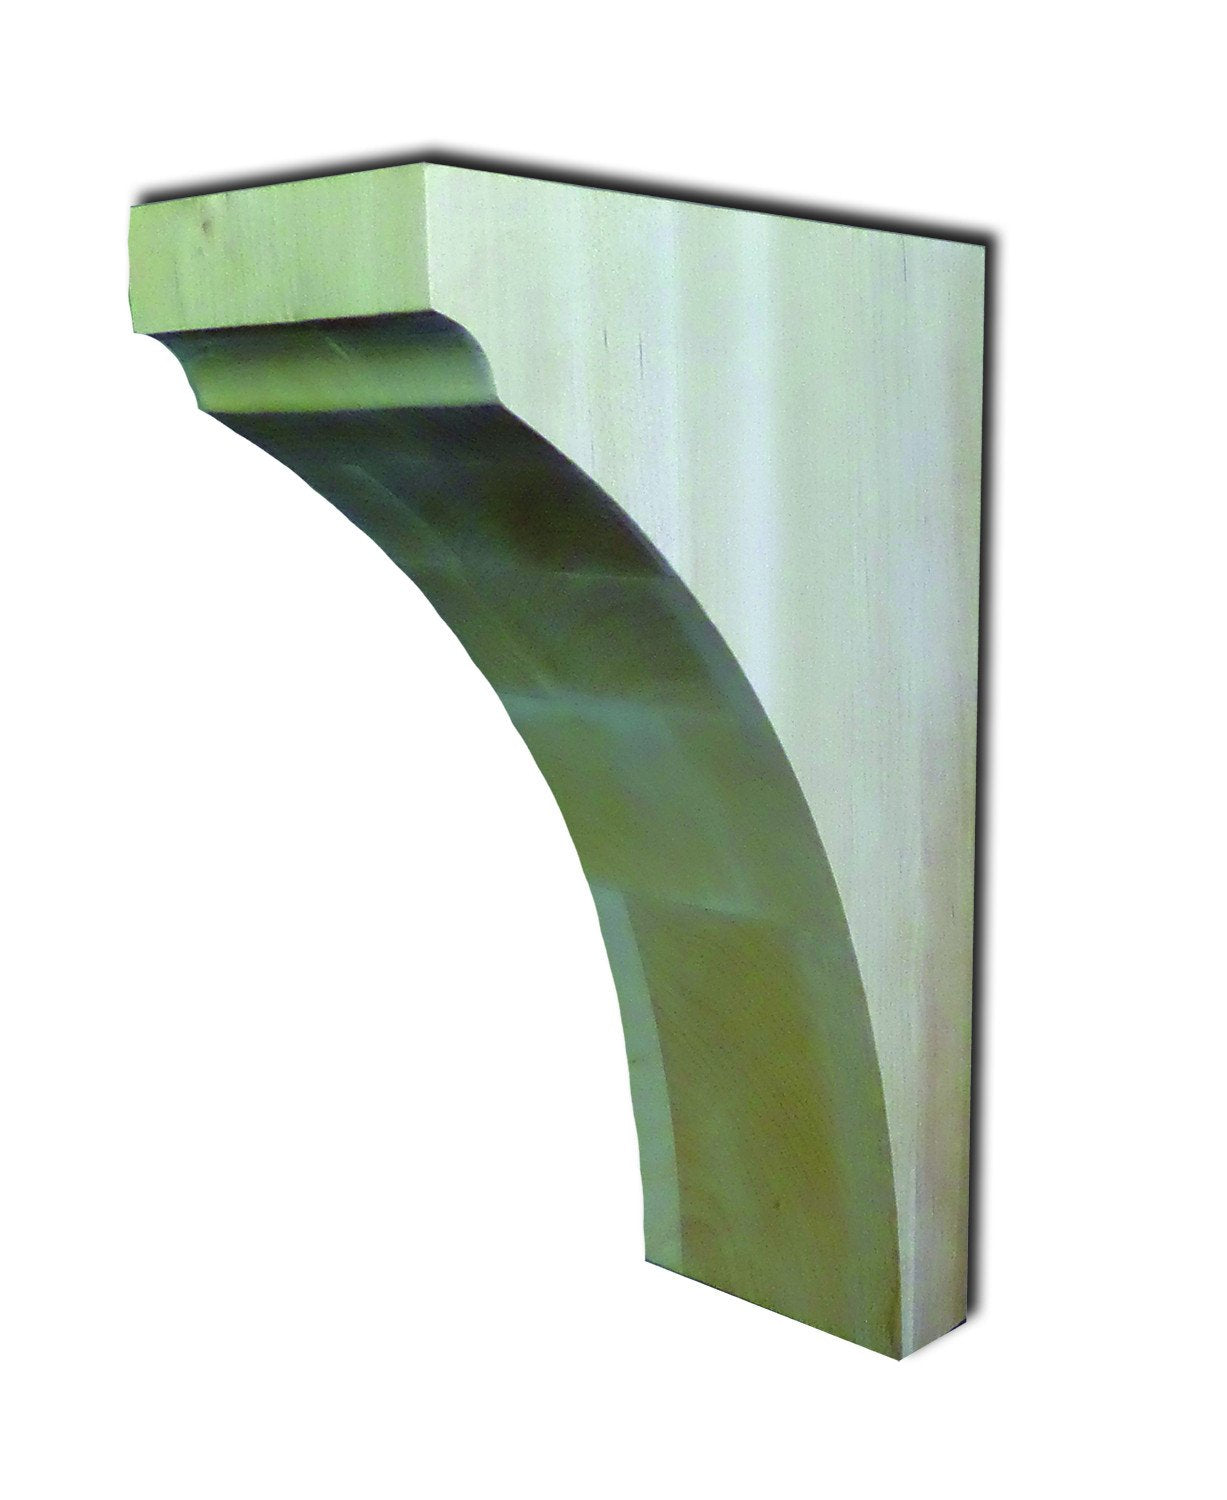 Castlewood SY-CA-211 Plain Countertop Support